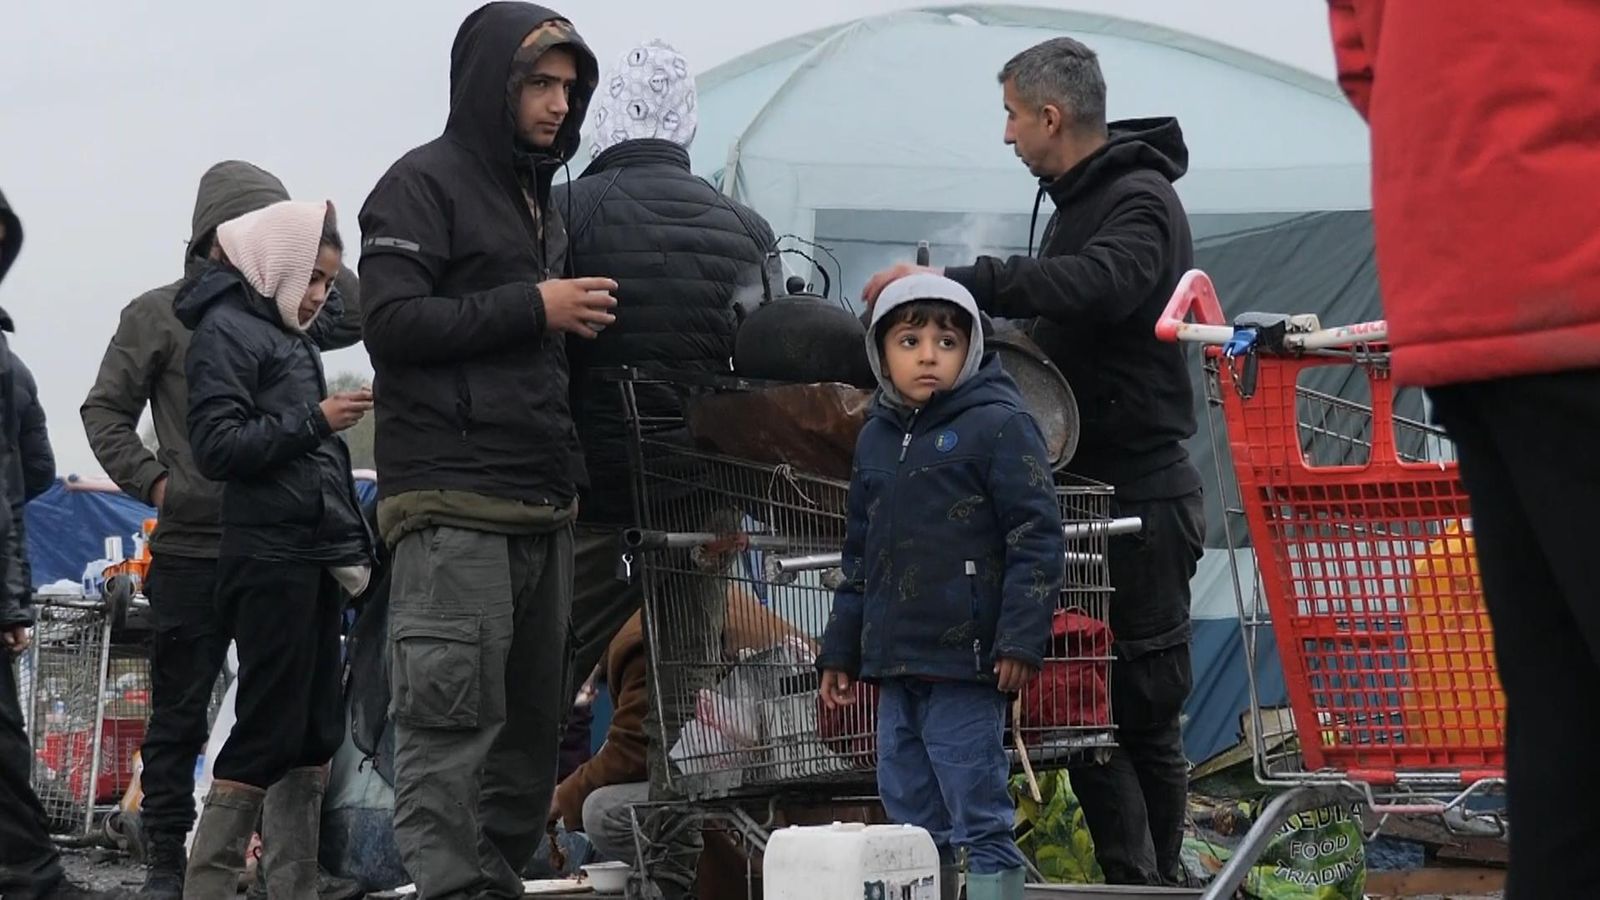 Inside Dunkirk migrant camp where desperate people remain determined to cross the Channel